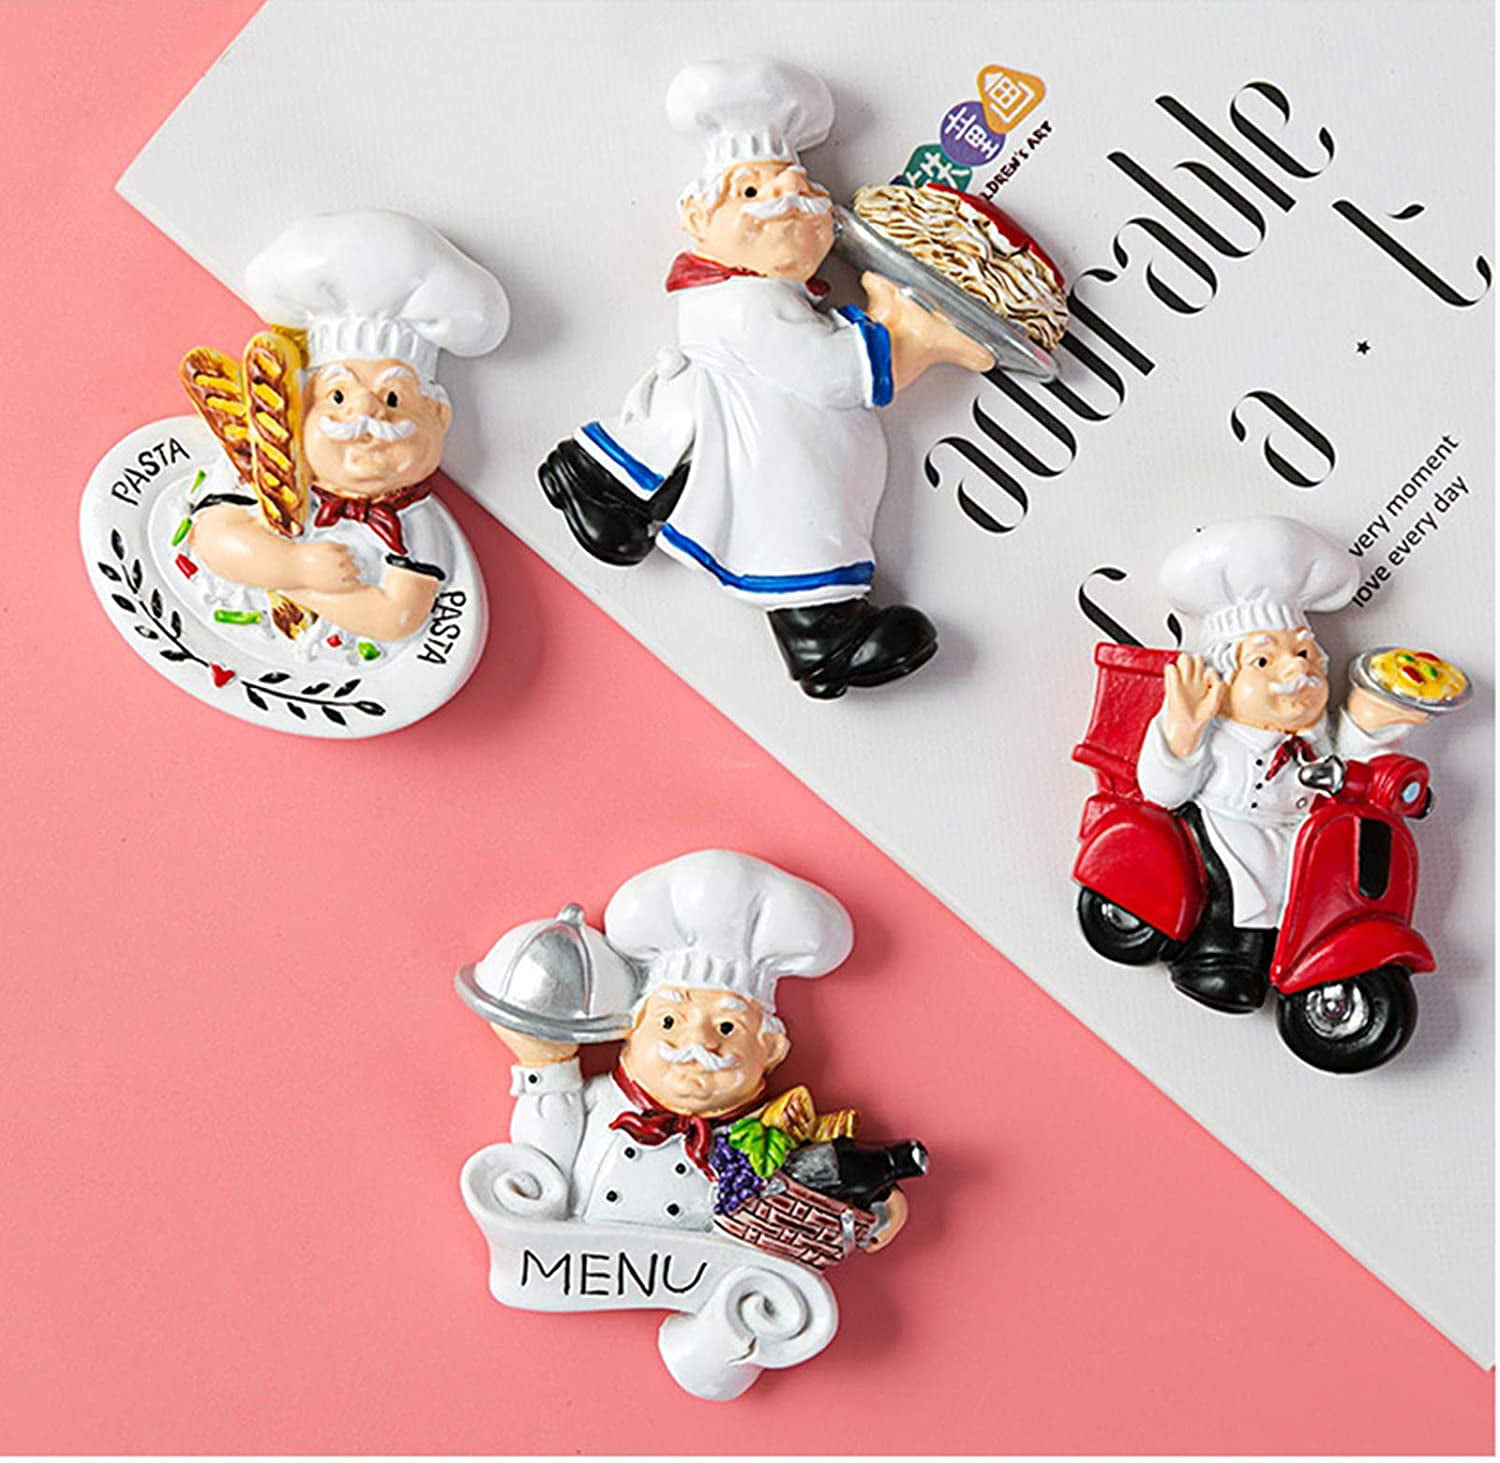 Fat Chef Refrigerator Magnet 6 pc Assorted Magnets Bistro Kitchen Decor Nice Gif 